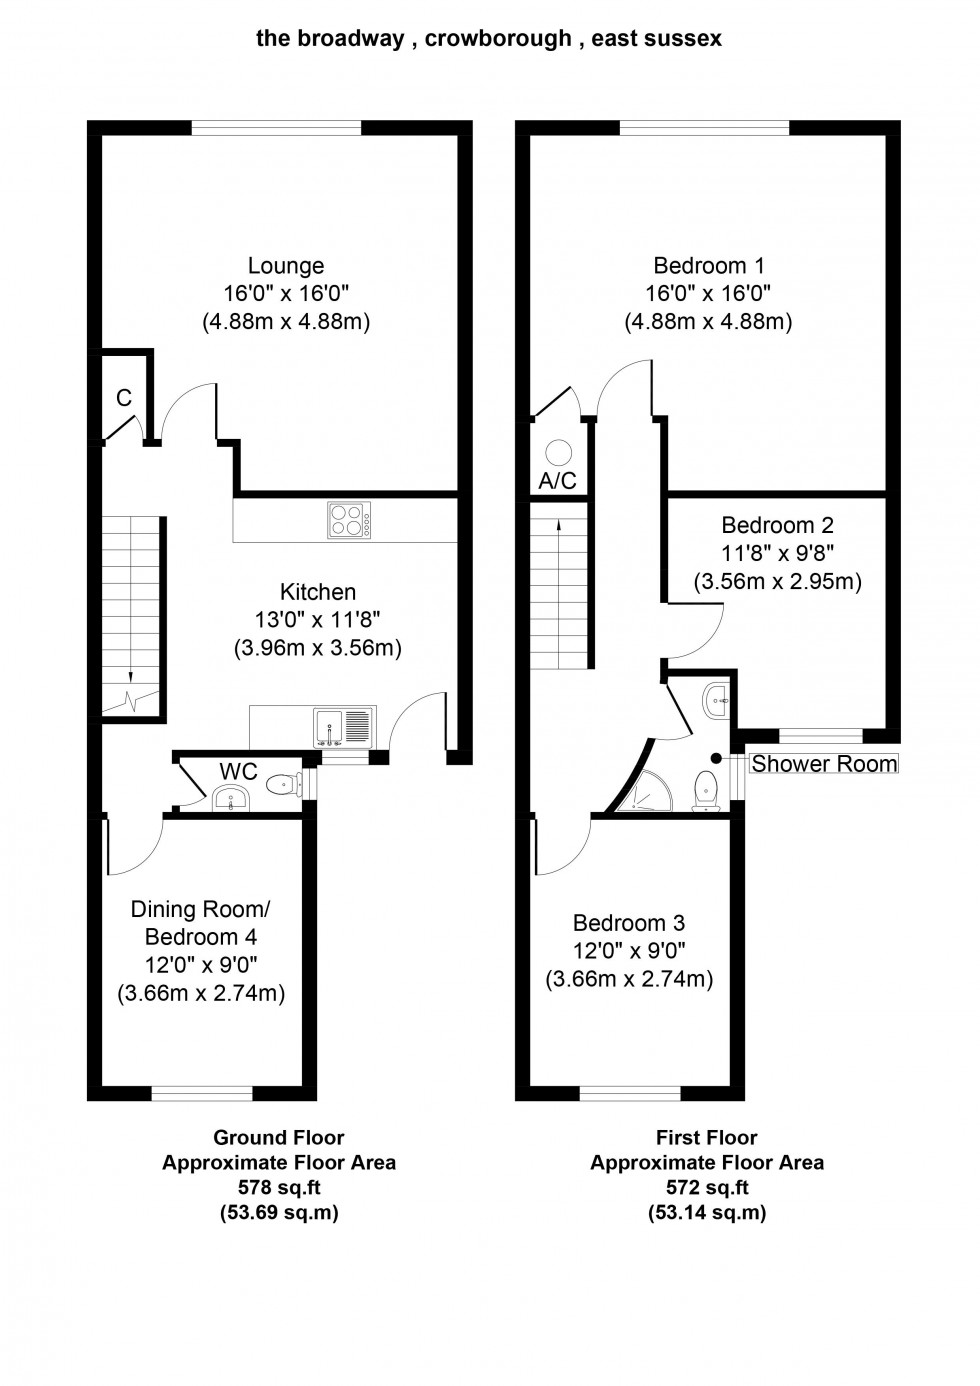 Floorplan for 4 Bedroom Maisonette with Parking, The Broadway, Crowborough